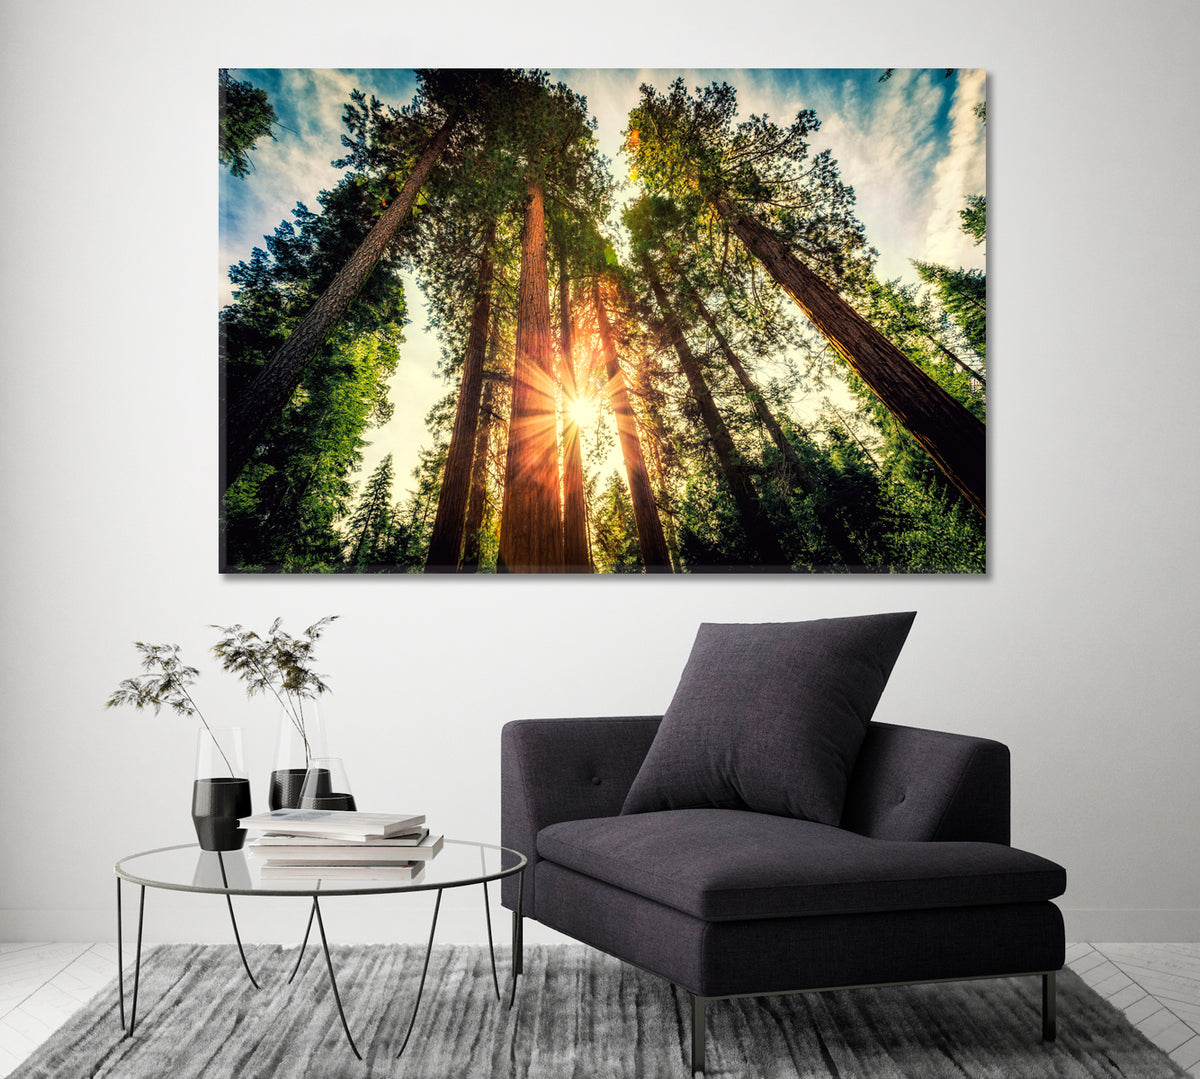 Giant Sequoias Yosemite National Park Canvas Print ArtLexy 1 Panel 24"x16" inches 